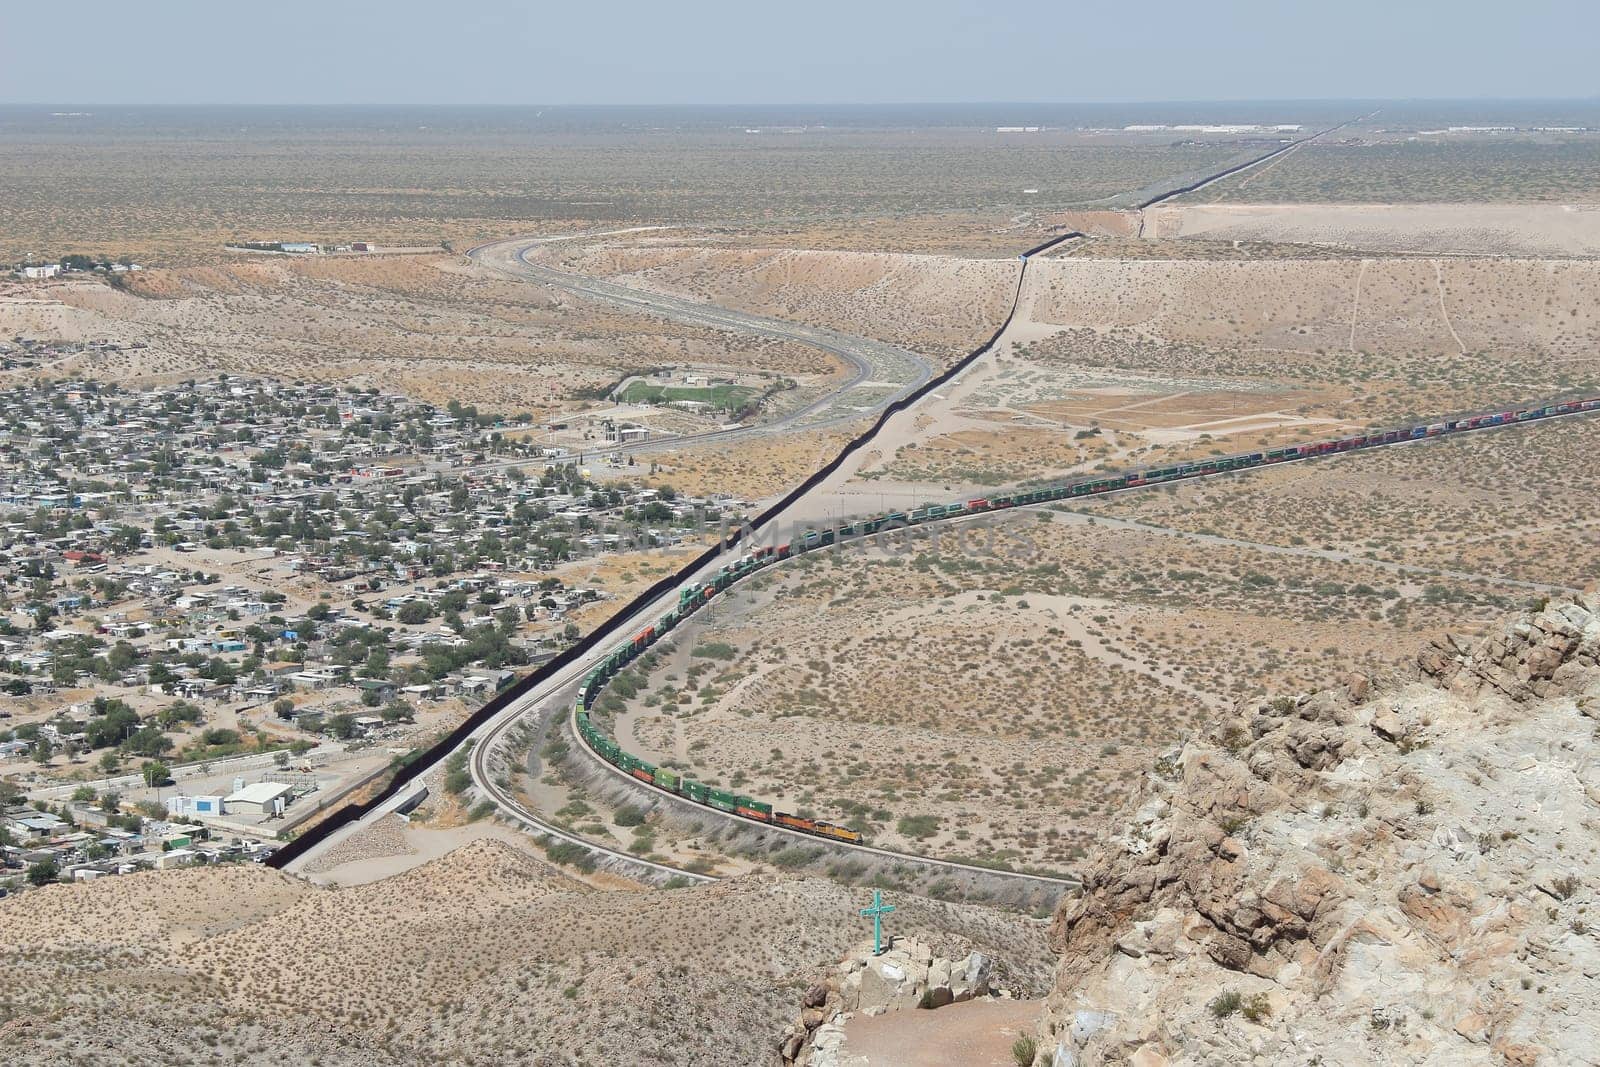 Border wall or fence and train, New Mexico running parallel to freight train on U.S. side of border